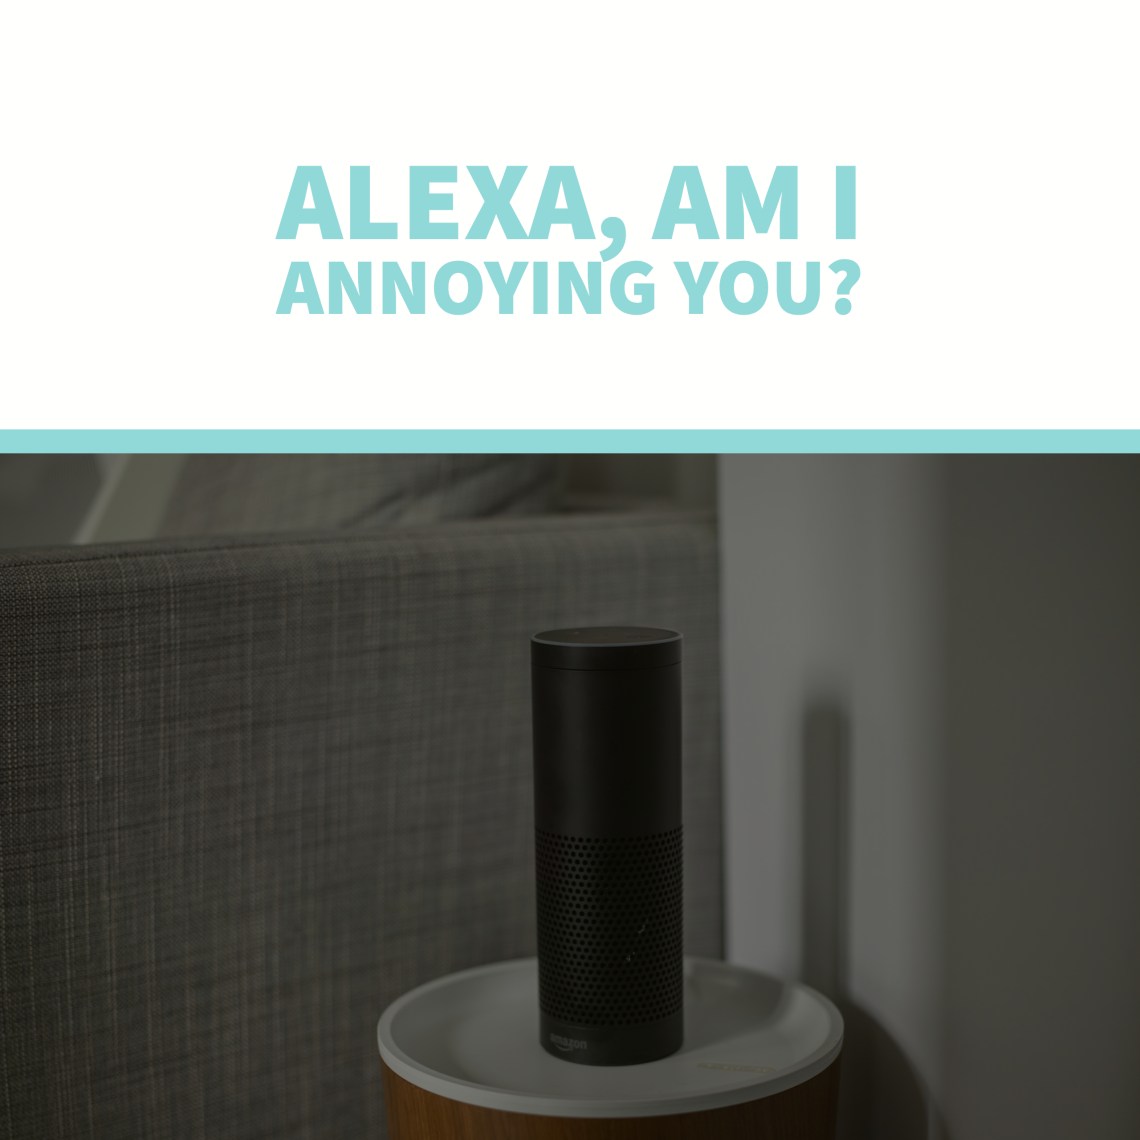 Things to ask Alexa